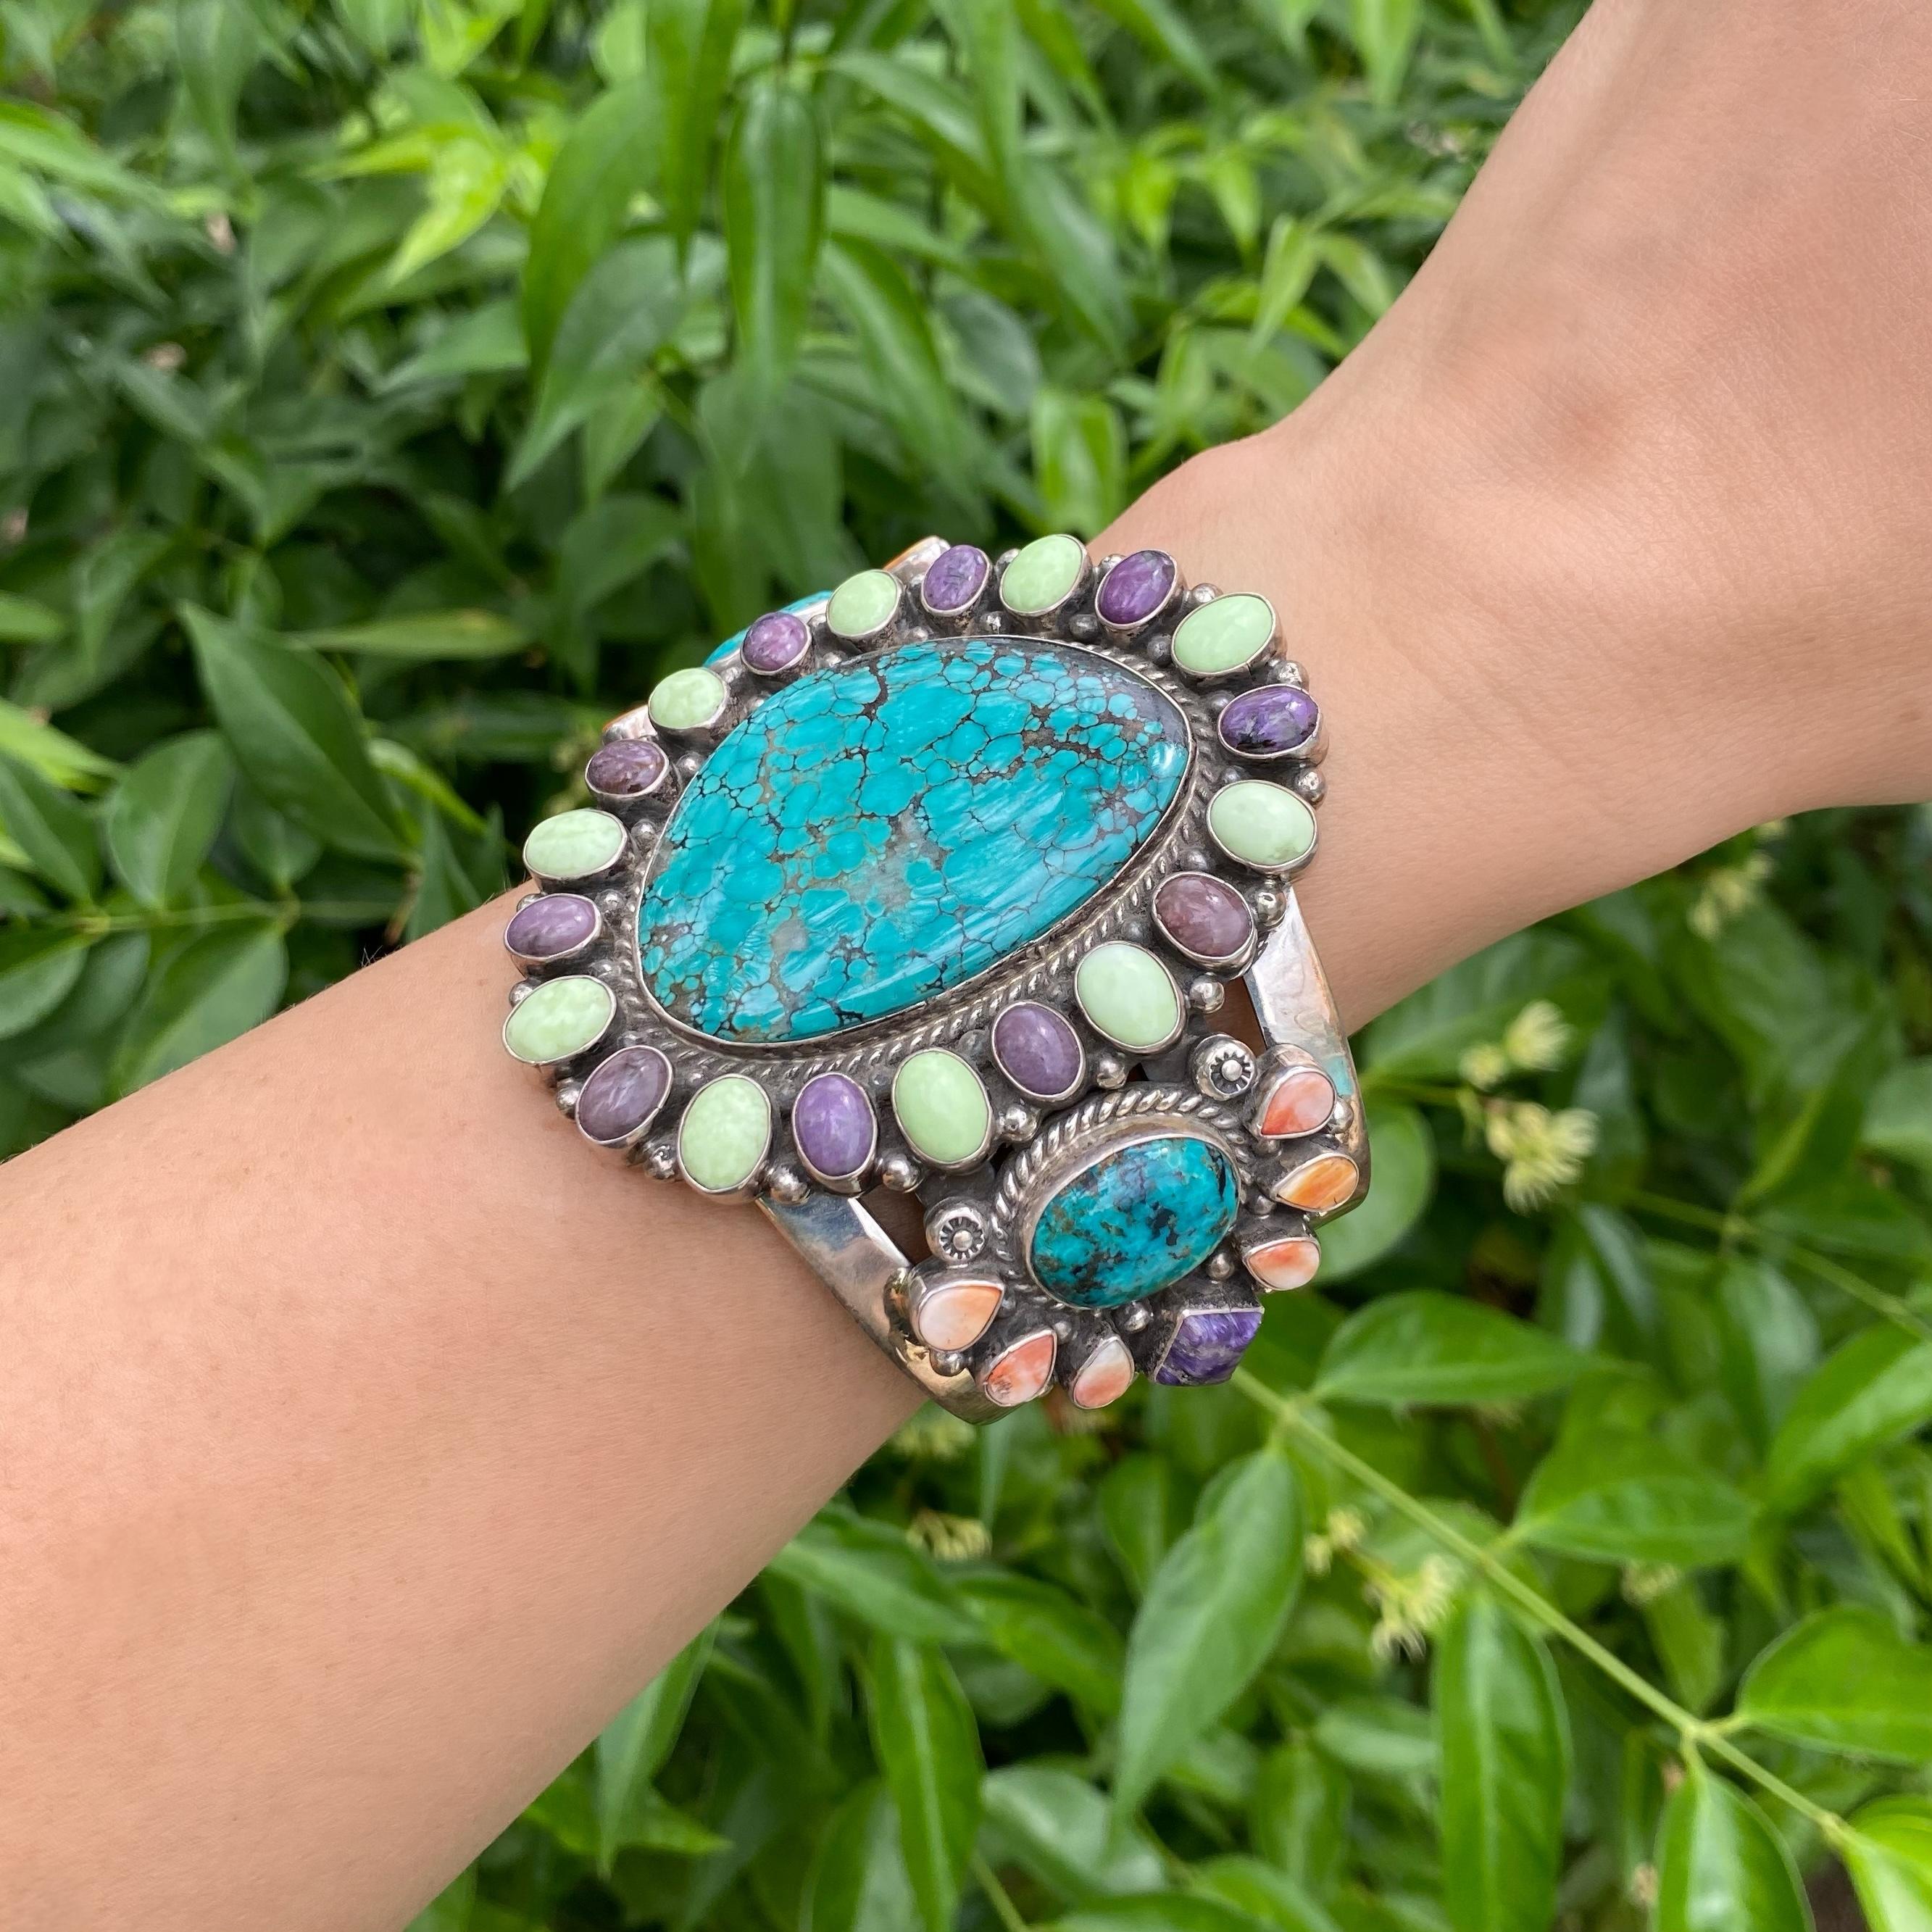 Stunning Highly Desirable Native American Navajo 925 Sterling Silver Large Cuff Bracelet featuring Turquoise, Sugilite, Spiny Oyster and Gespeite in beautifully Hand crafted Sterling Silver frame. Marked: Sterling Lee Bennett. Dimensions: 3.38” w x